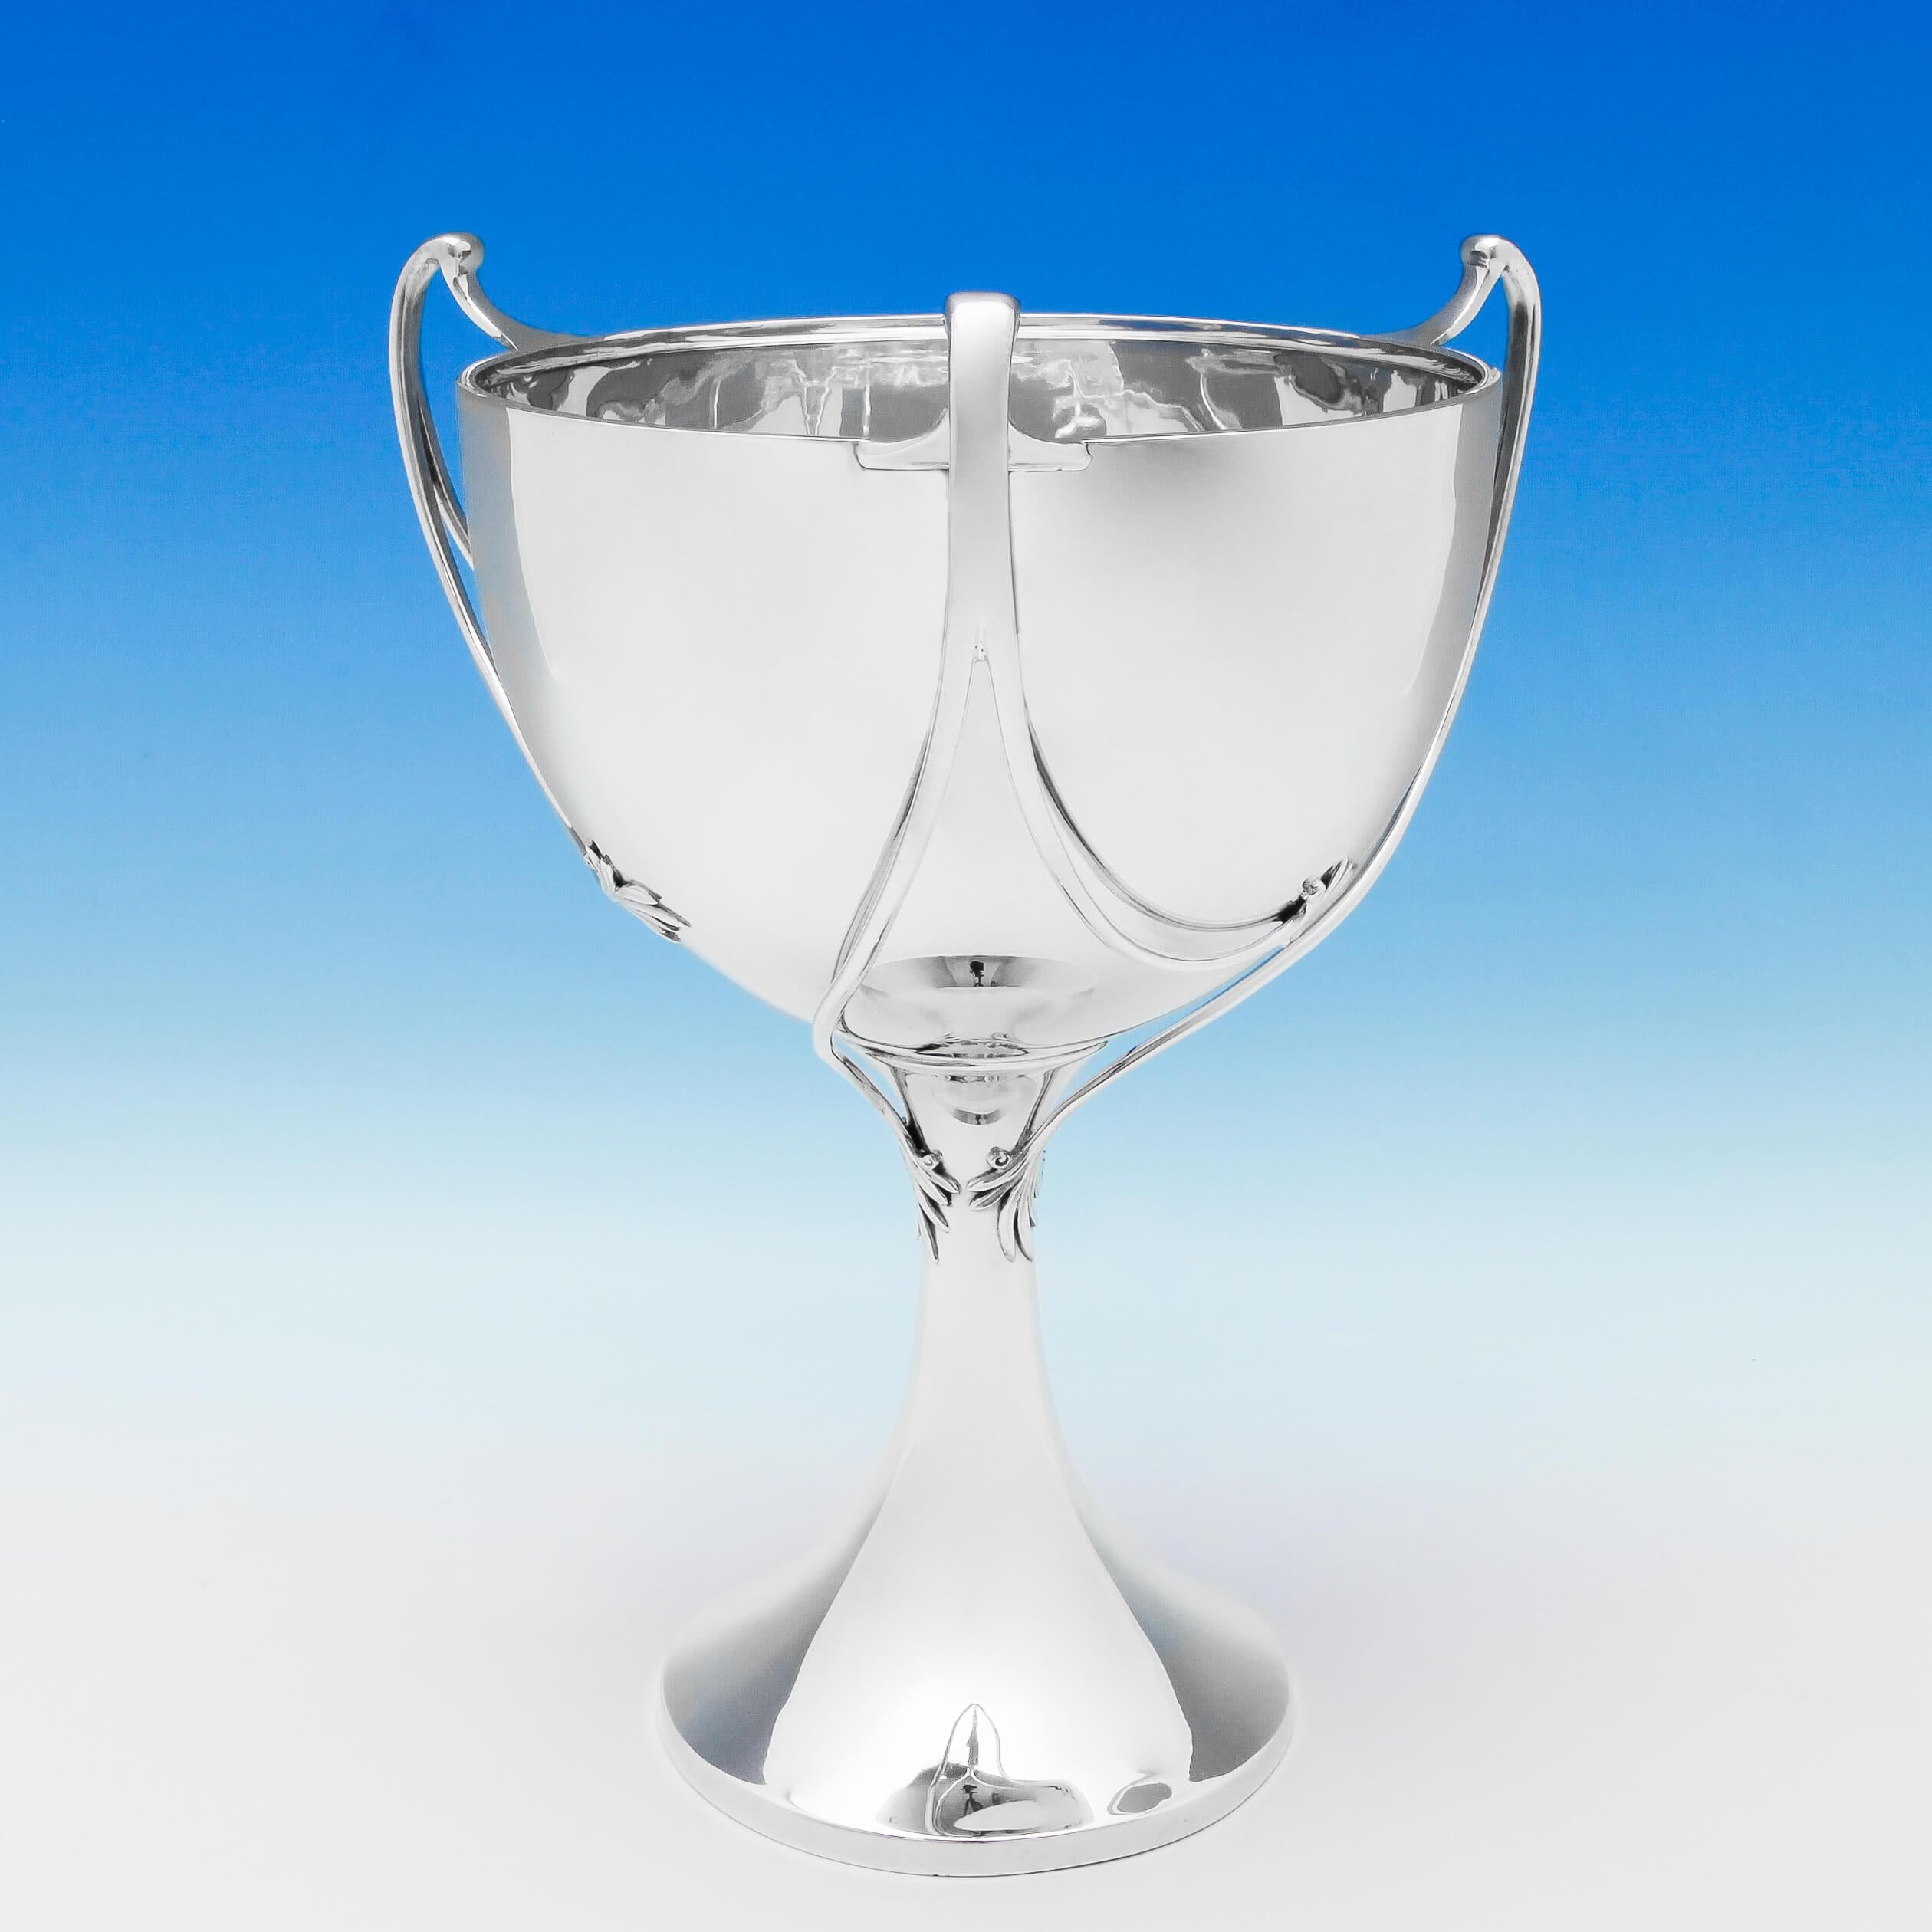 Hallmarked in London in 1927 by William Bruford & Son, this stylish, George V, Sterling Silver Trophy Cup, is elegant and simple in design, featuring three swirling handles with naturalistic terminals. The trophy cup measures 13